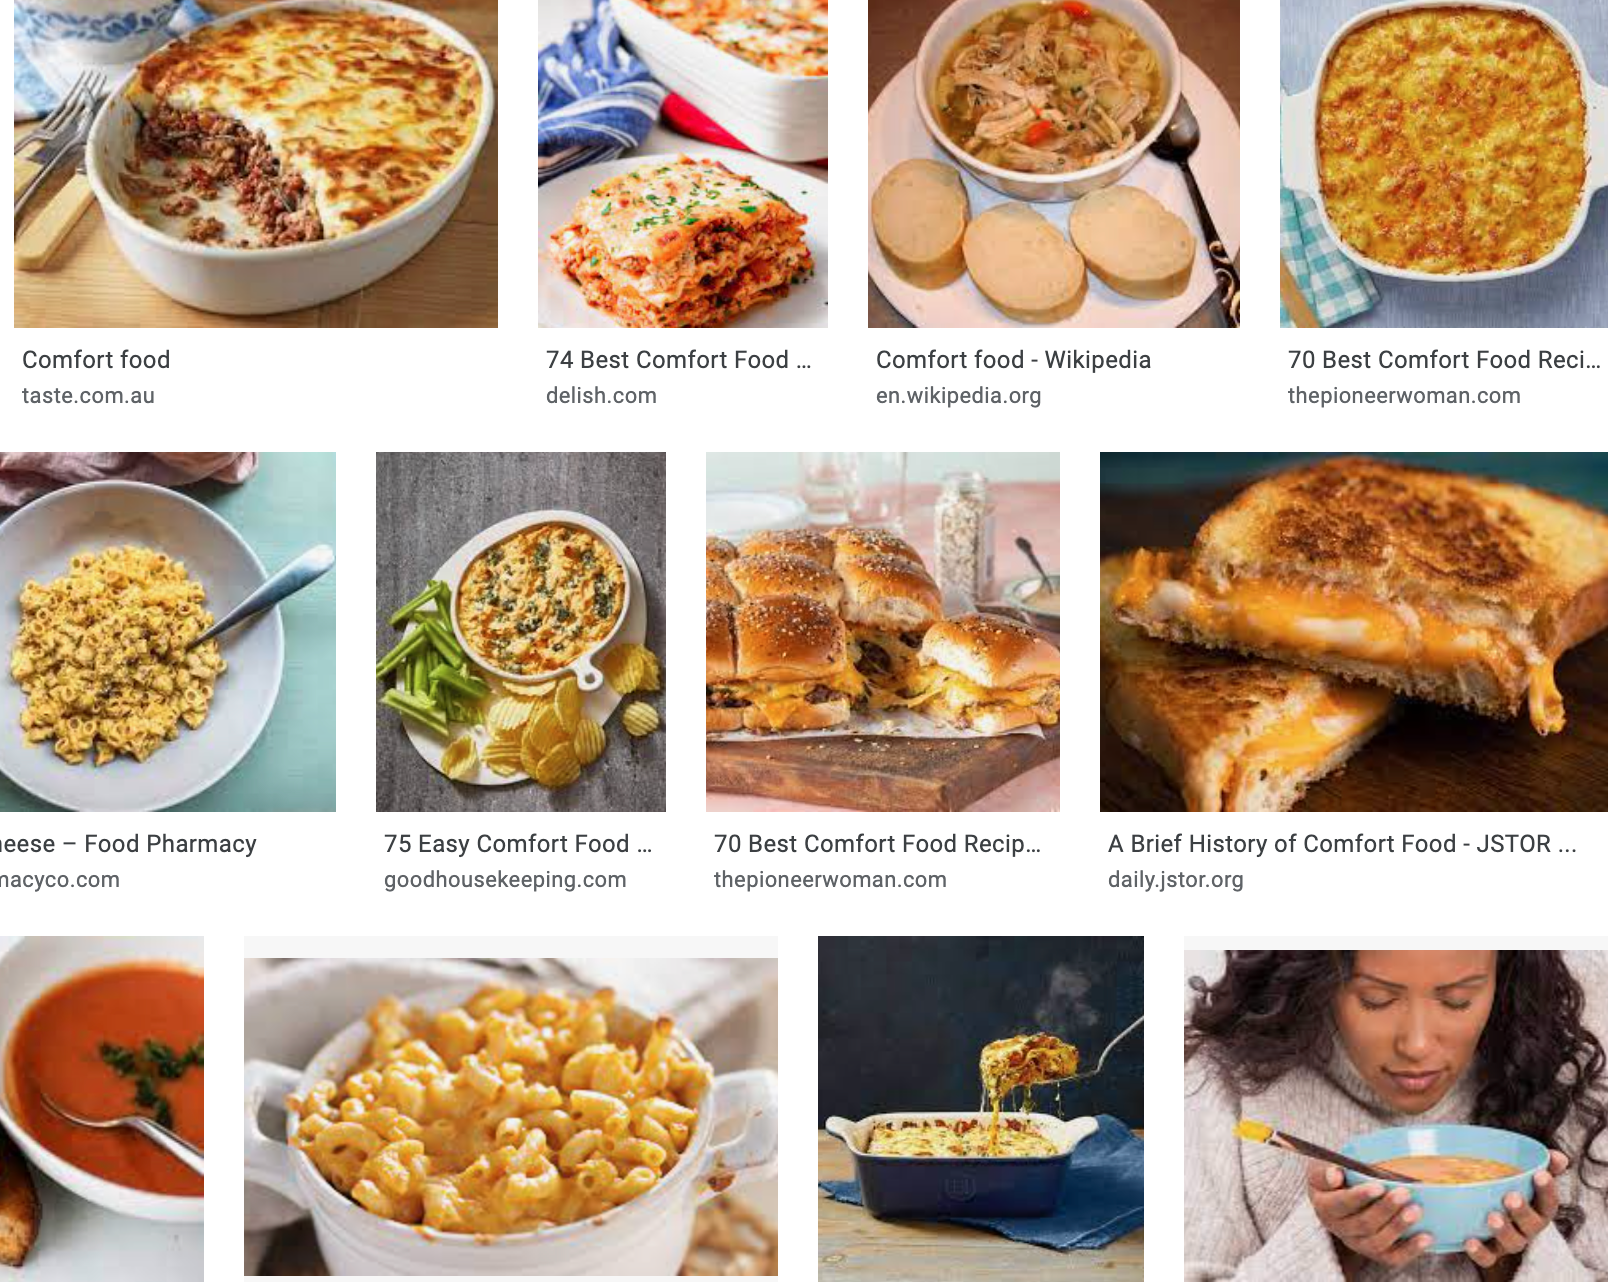 images of "comfort food"